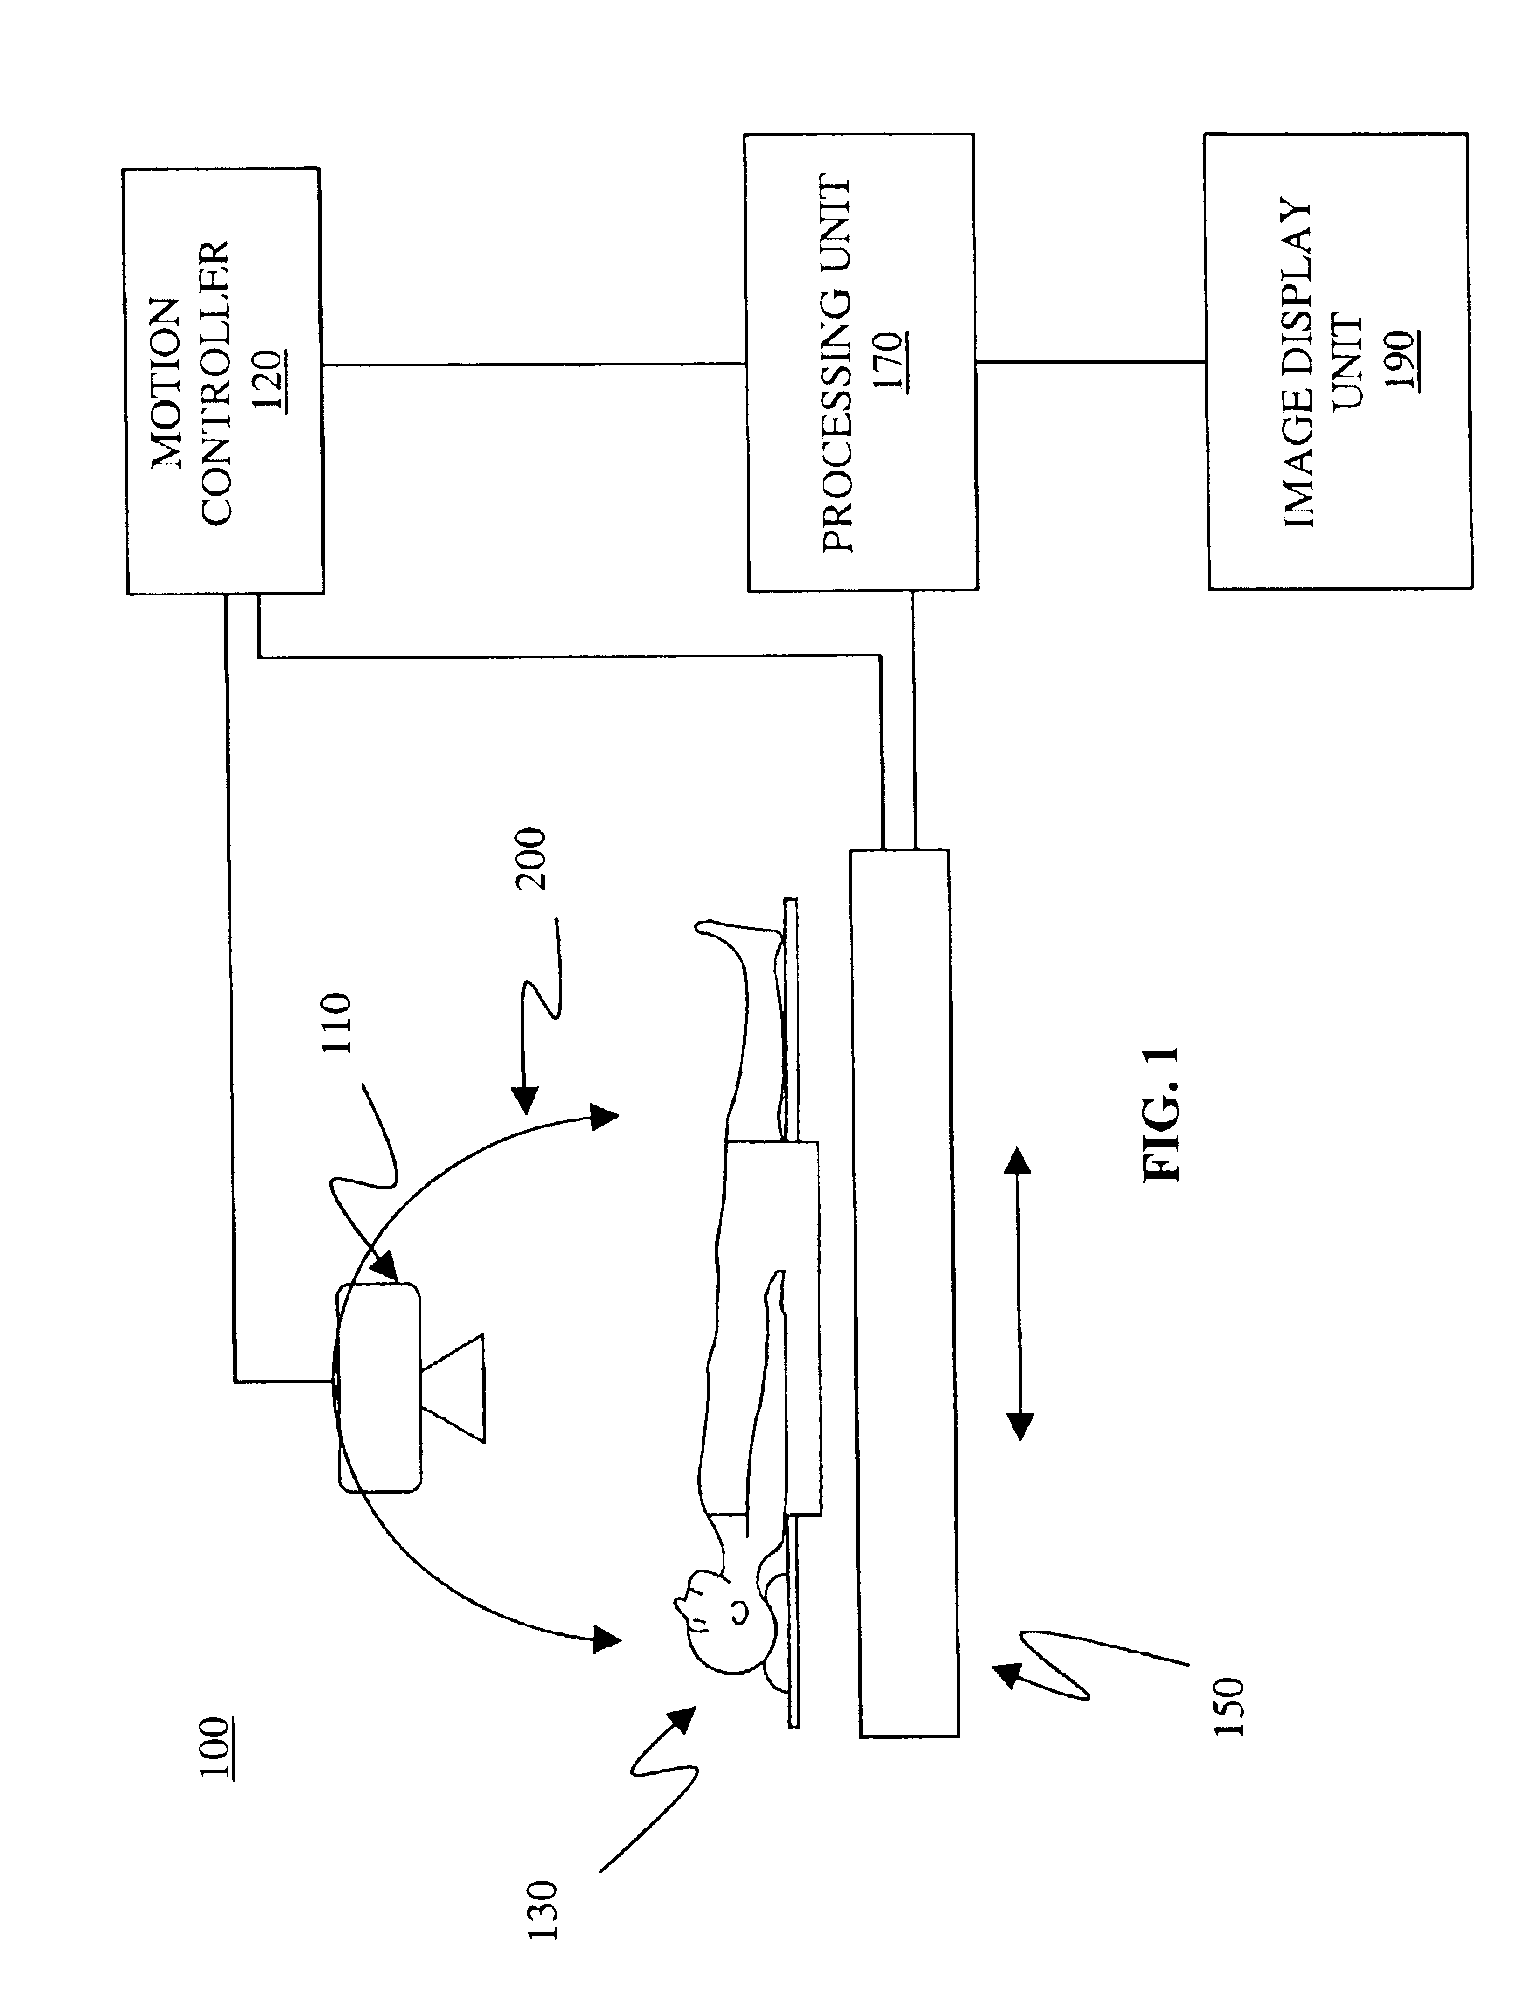 Continuous scan tomosynthesis system and method